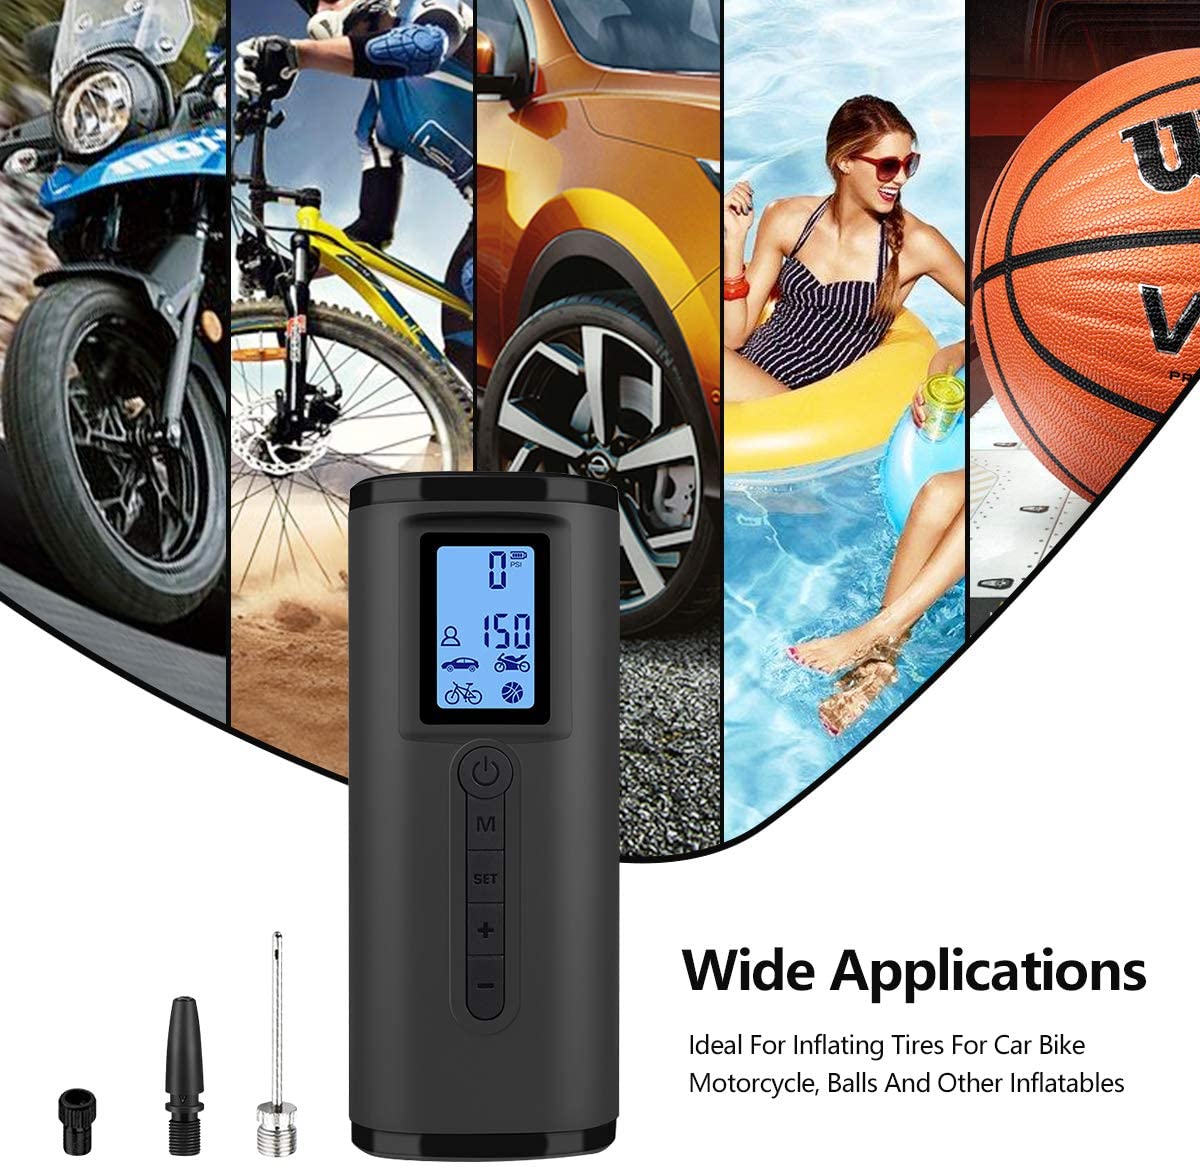 USB-C Portable Tyre Inflator for Cars, Bikes, and Sports